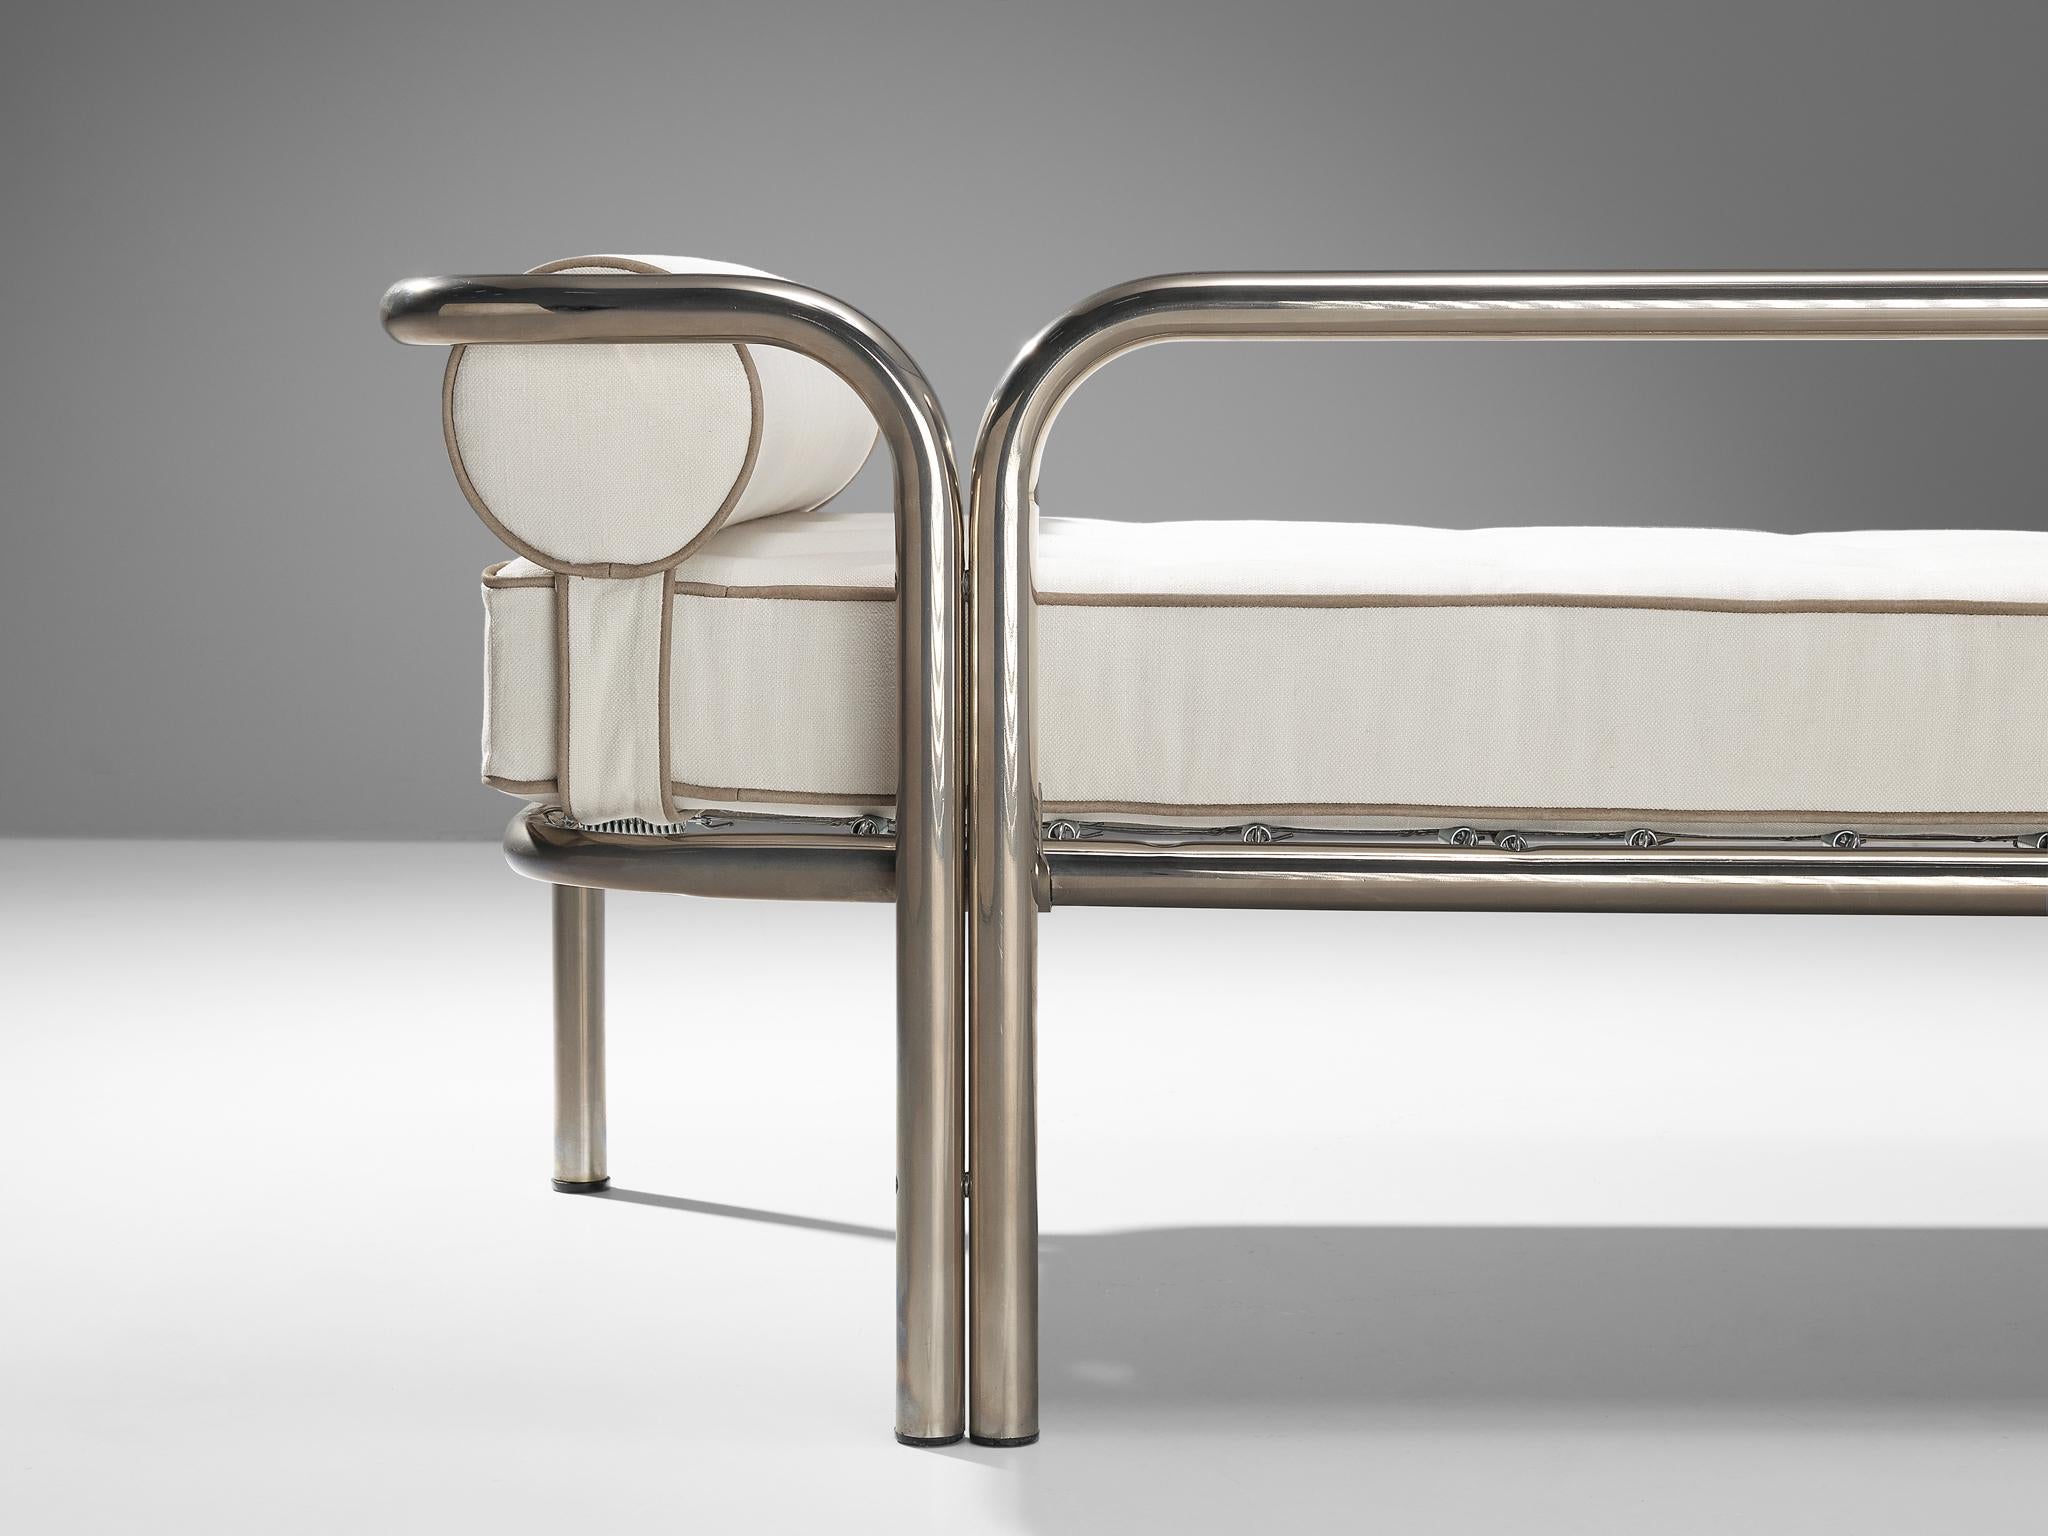 Gae Aulenti for Poltronova 'Locus Solus' Daybed in Chrome-Plated Steel 2